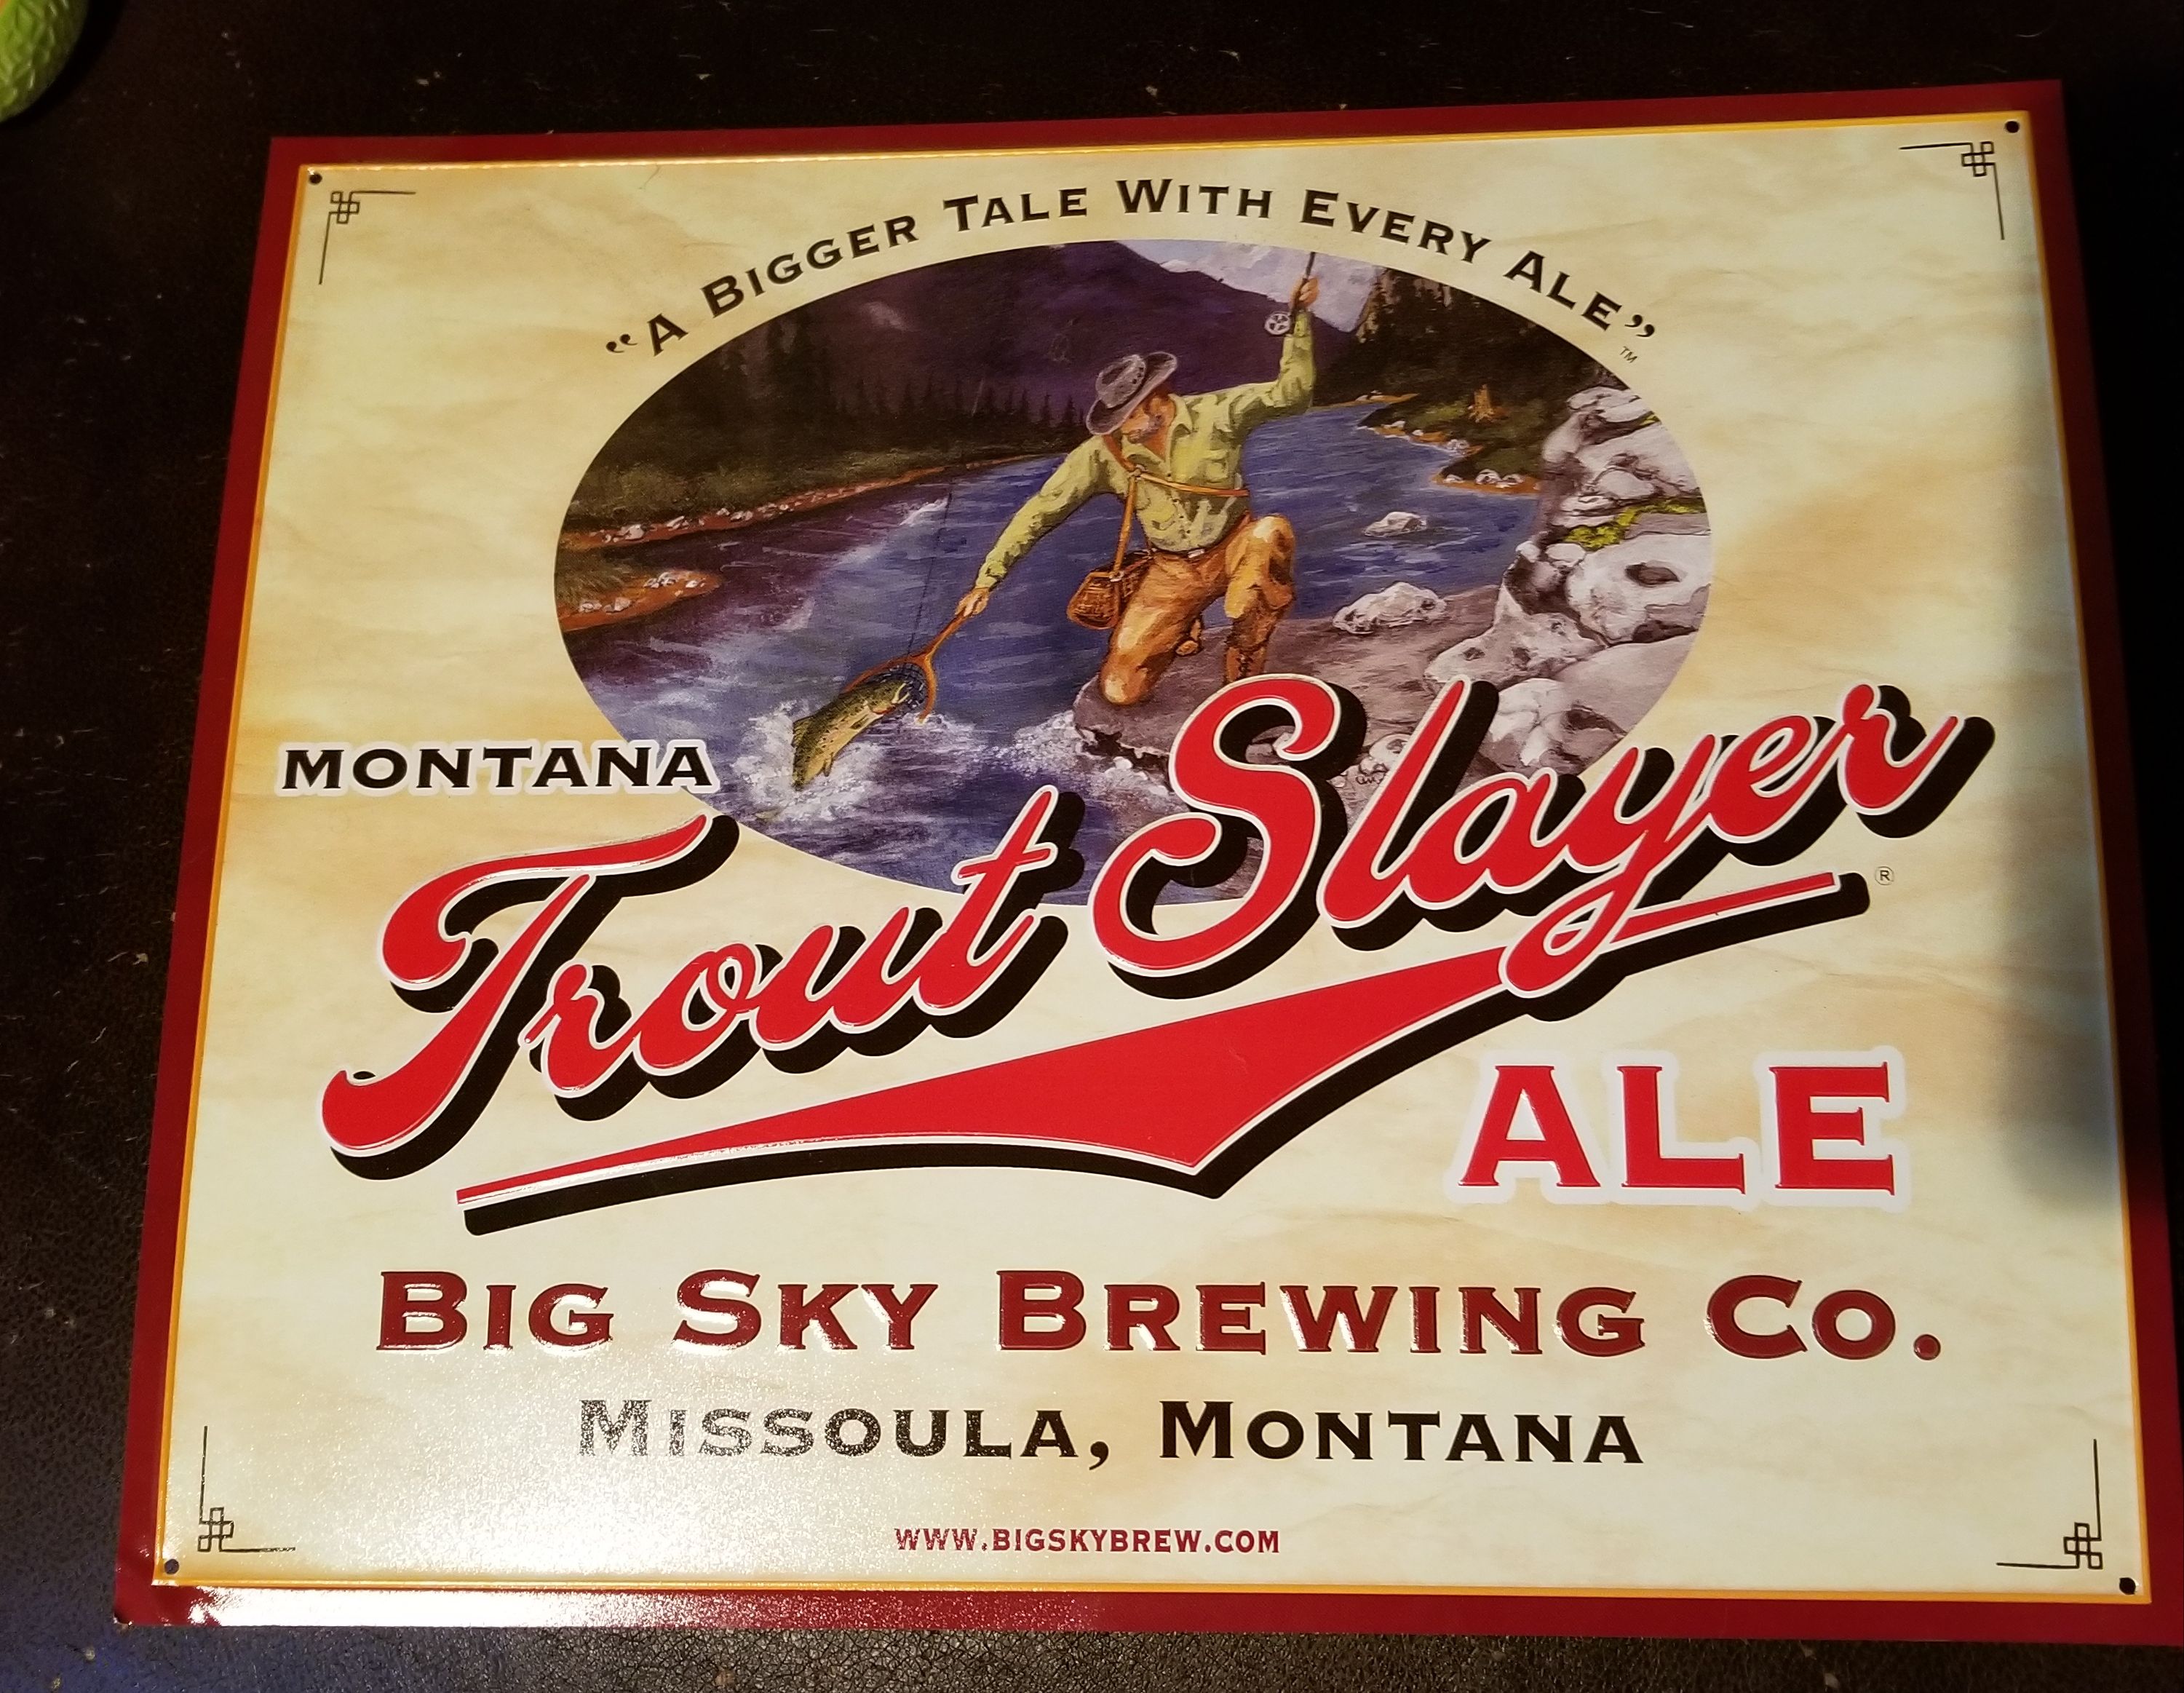 Trout slayer ale beer sign man cave for Sale in Lacey, WA - OfferUp